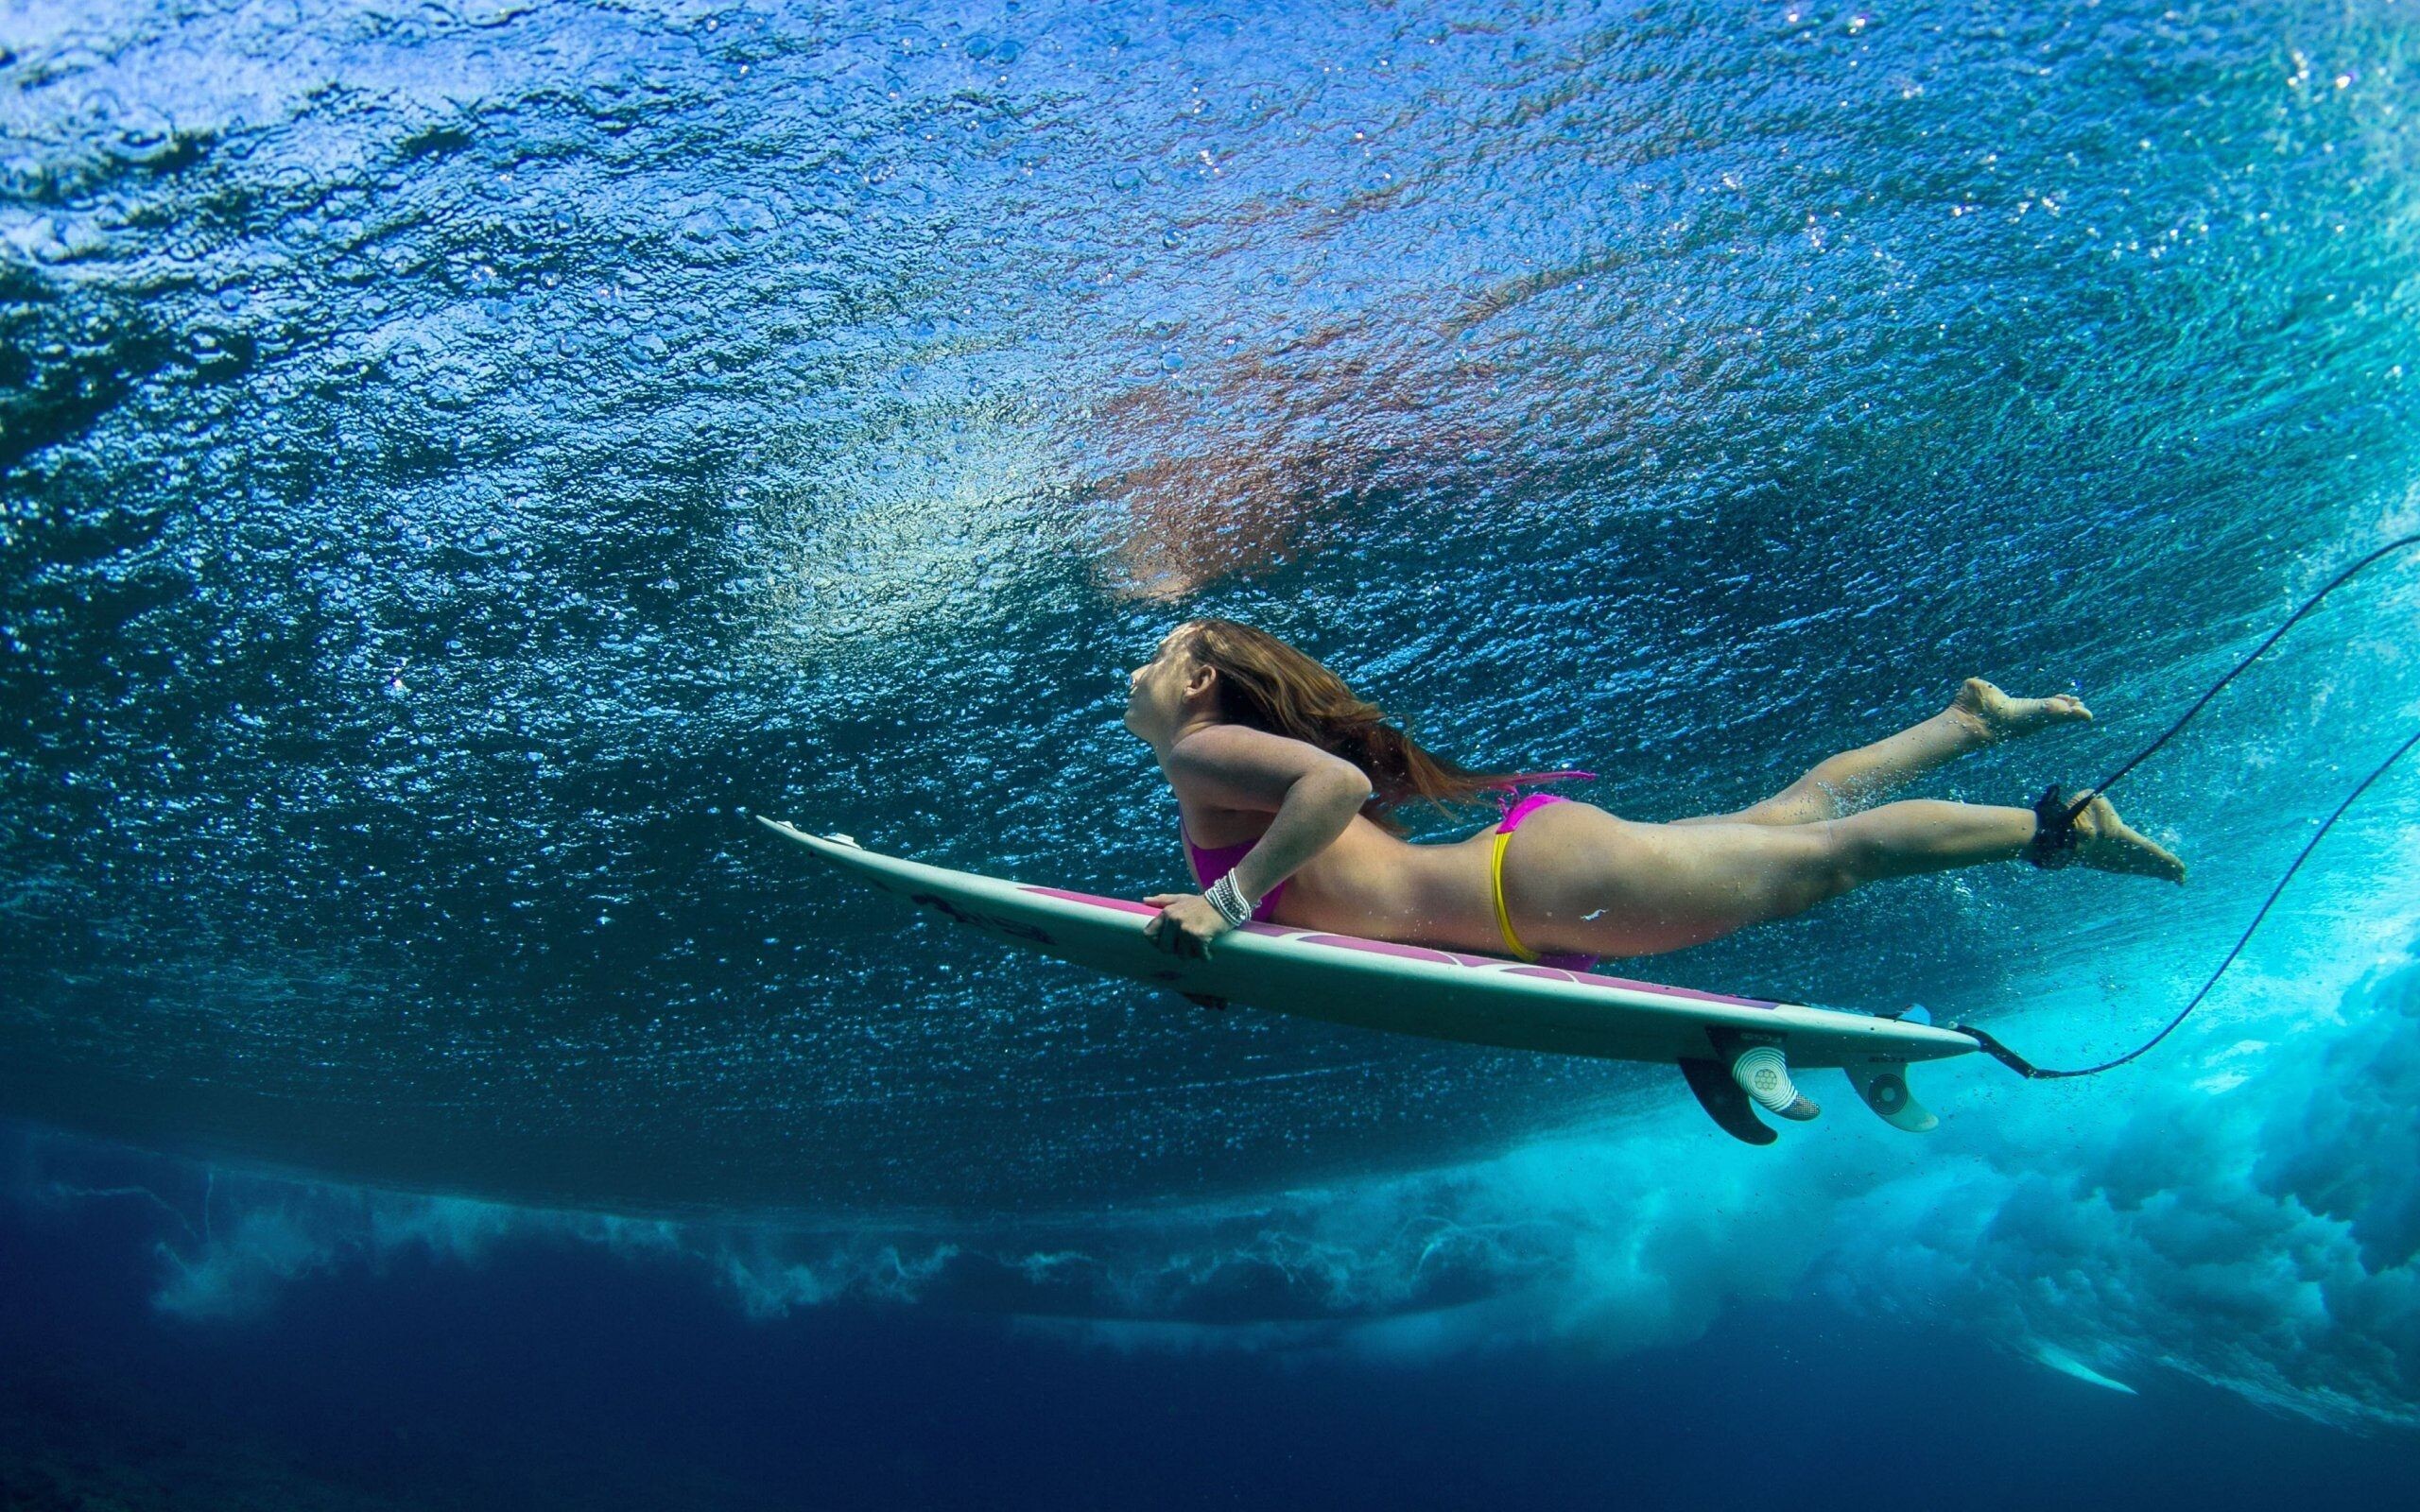 Girl Surfing: Tow-in cross-over water sports discipline, Underwater, Wave riding. 2560x1600 HD Background.